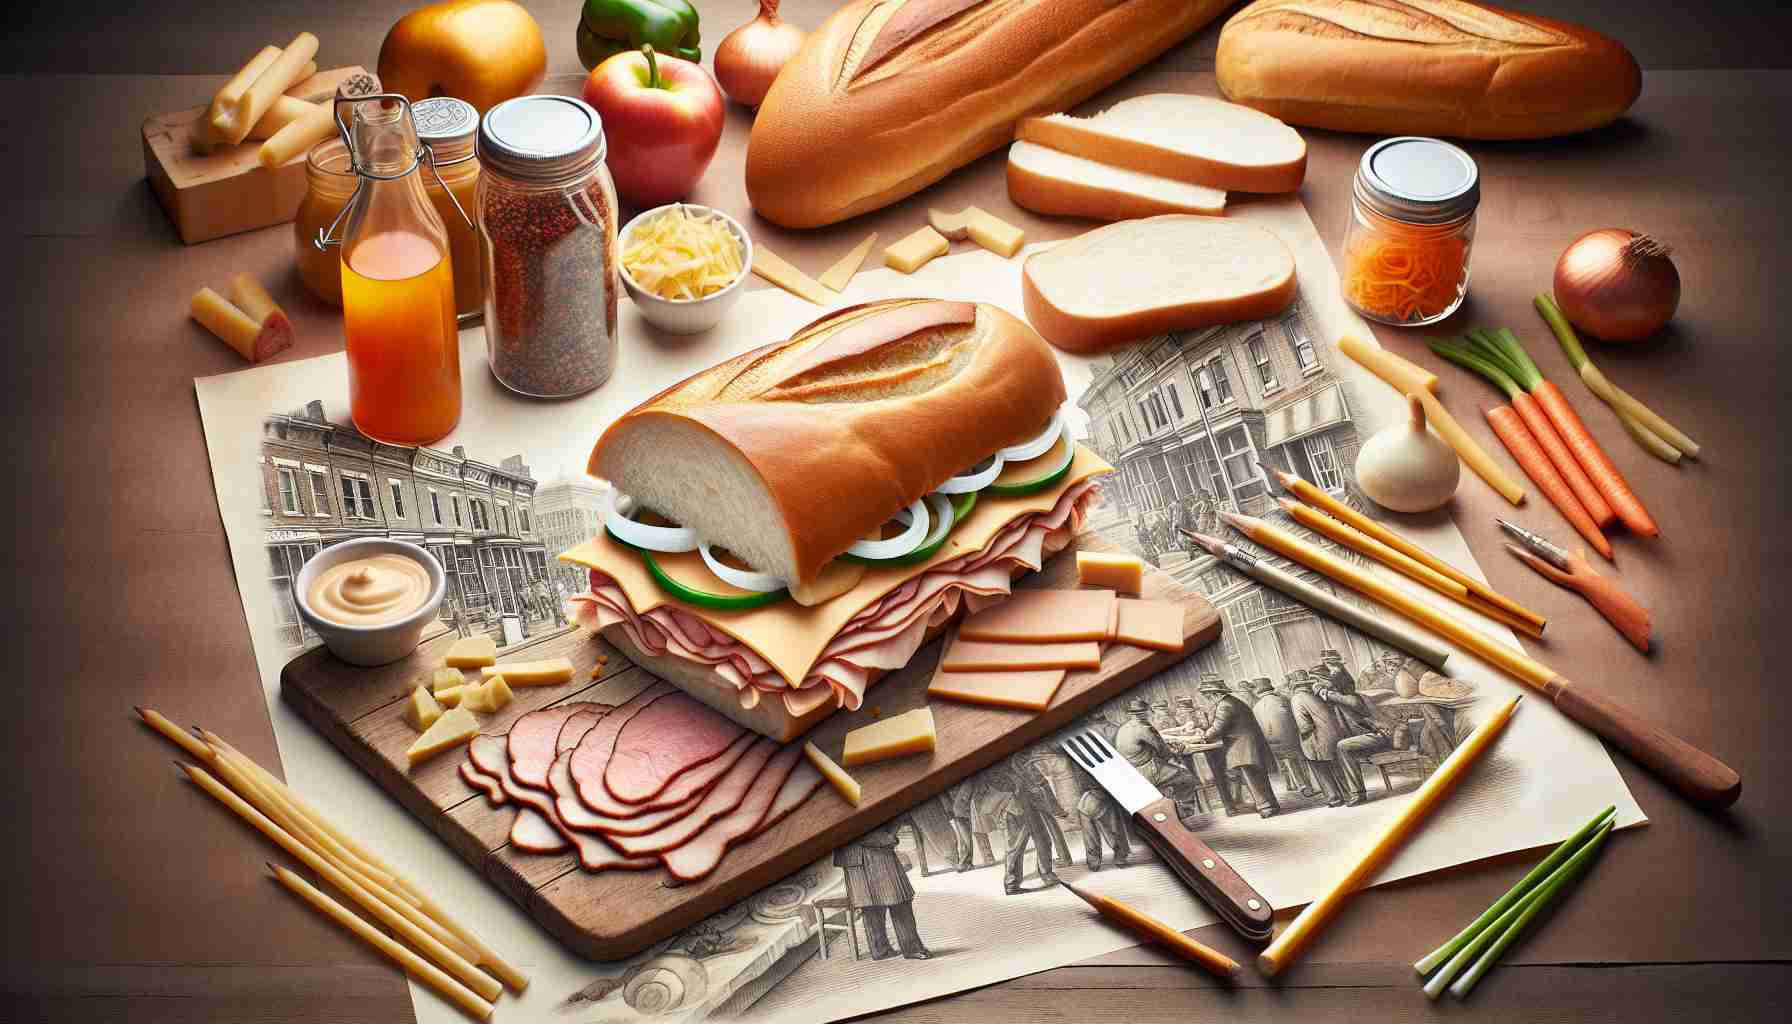 Create a high-definition, realistic photo that visually represents the cultural origins of Philadelphia's iconic sandwiches. It should include a spread of ingredients typically used in these sandwiches, like sliced meat, cheese, onions, and bread. Also, illustrate the process of preparation and serving in a setting that hints at the historical and cultural background of Philadelphia, such as a traditional kitchen or a historic sandwich shop.